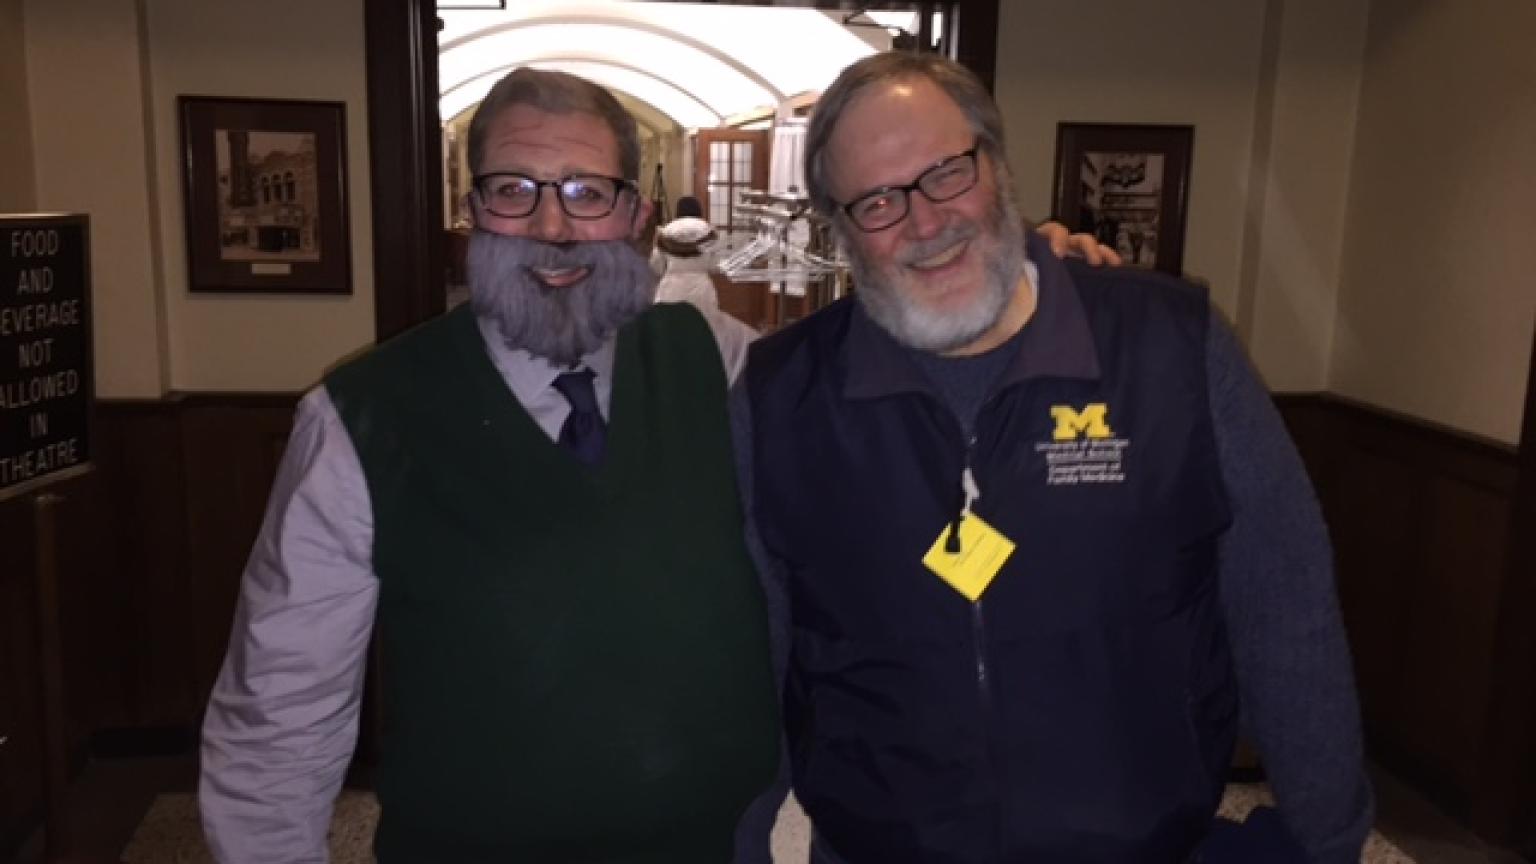 Kent with a student who is dressed up as Kent wearing a fake beard and padded sweater vest